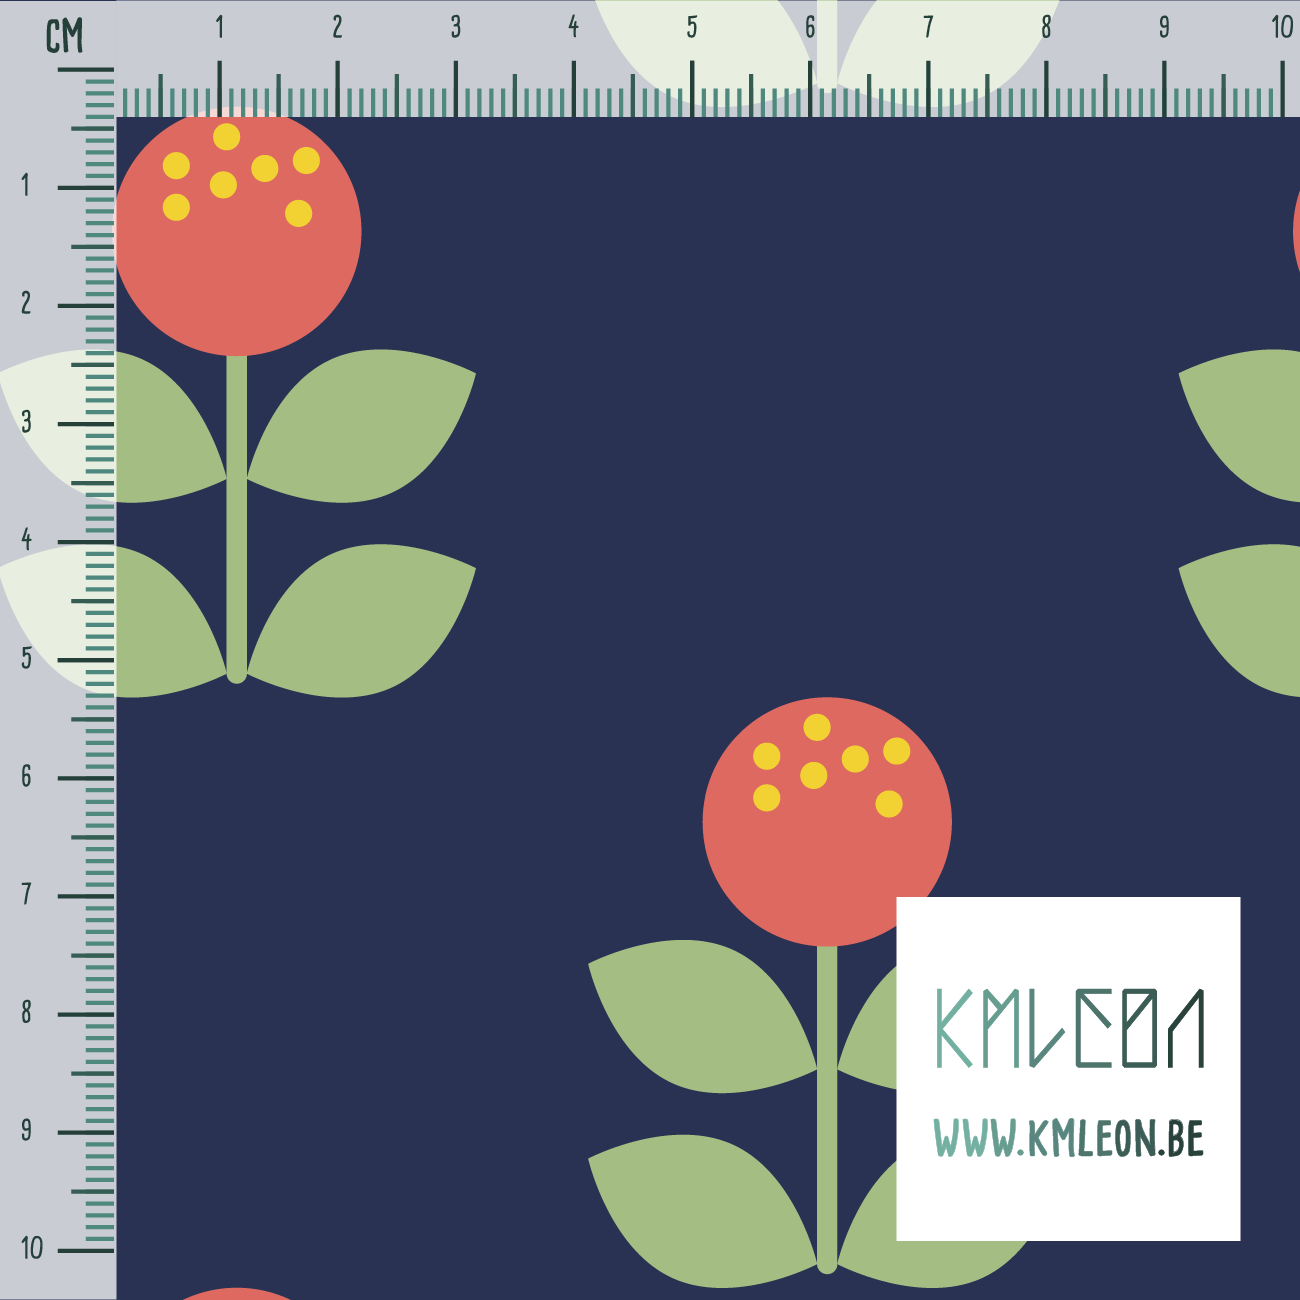 Large coral and green flowers fabric